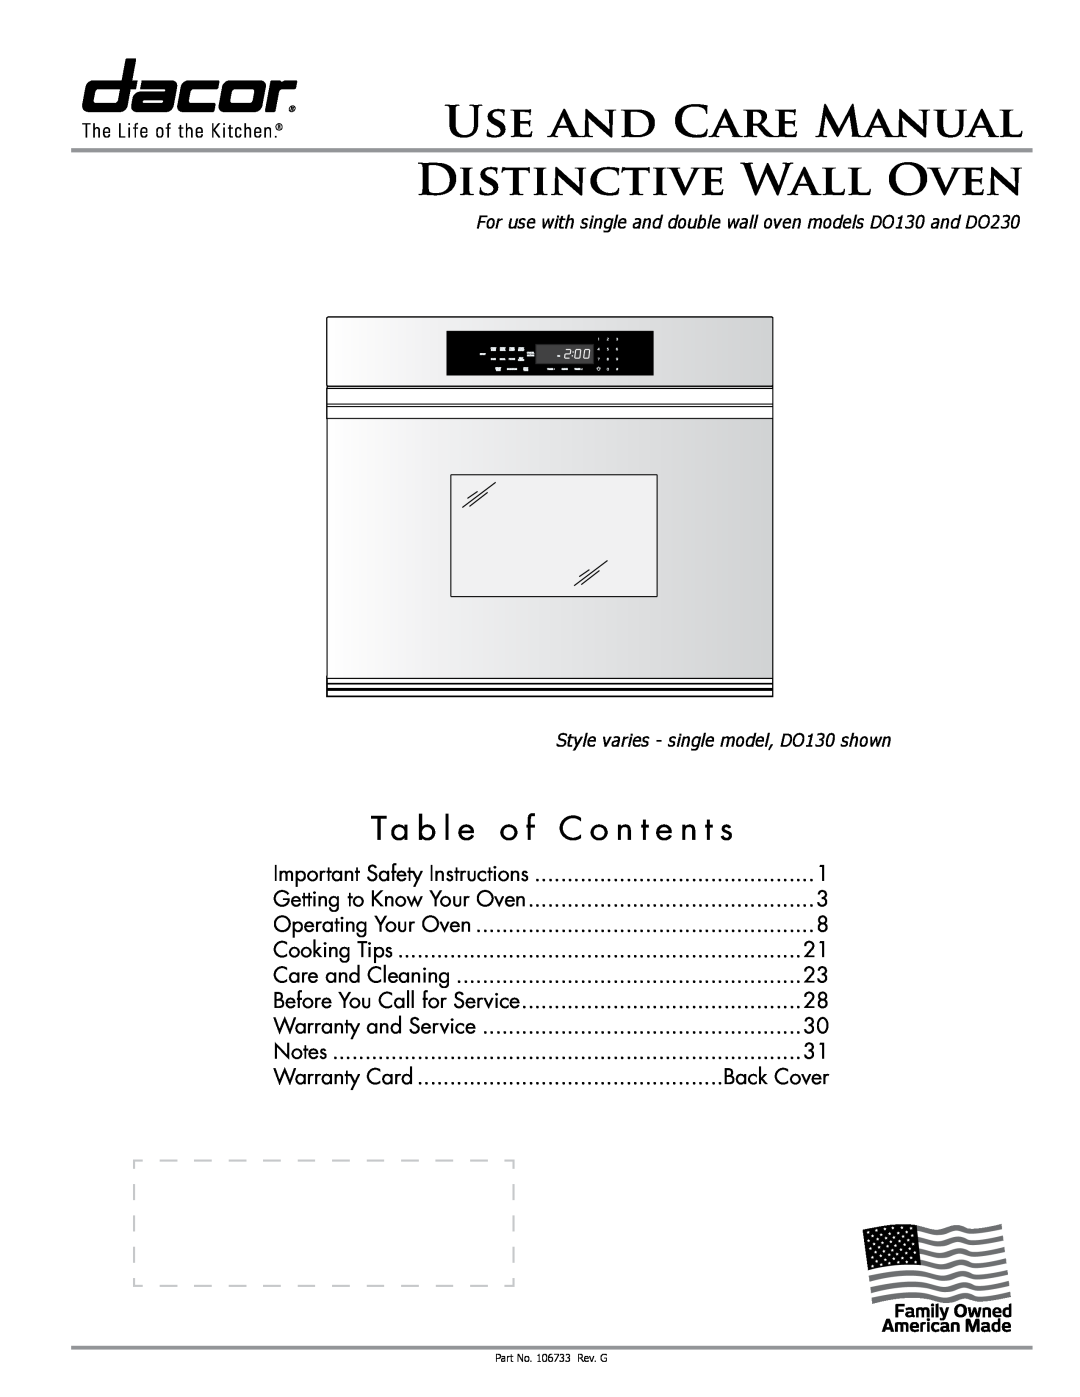 Dacor DO130 manual Ta b l e o f C o n t e n t s, Important Safety Instructions, Getting to Know Your Oven, Back Cover 